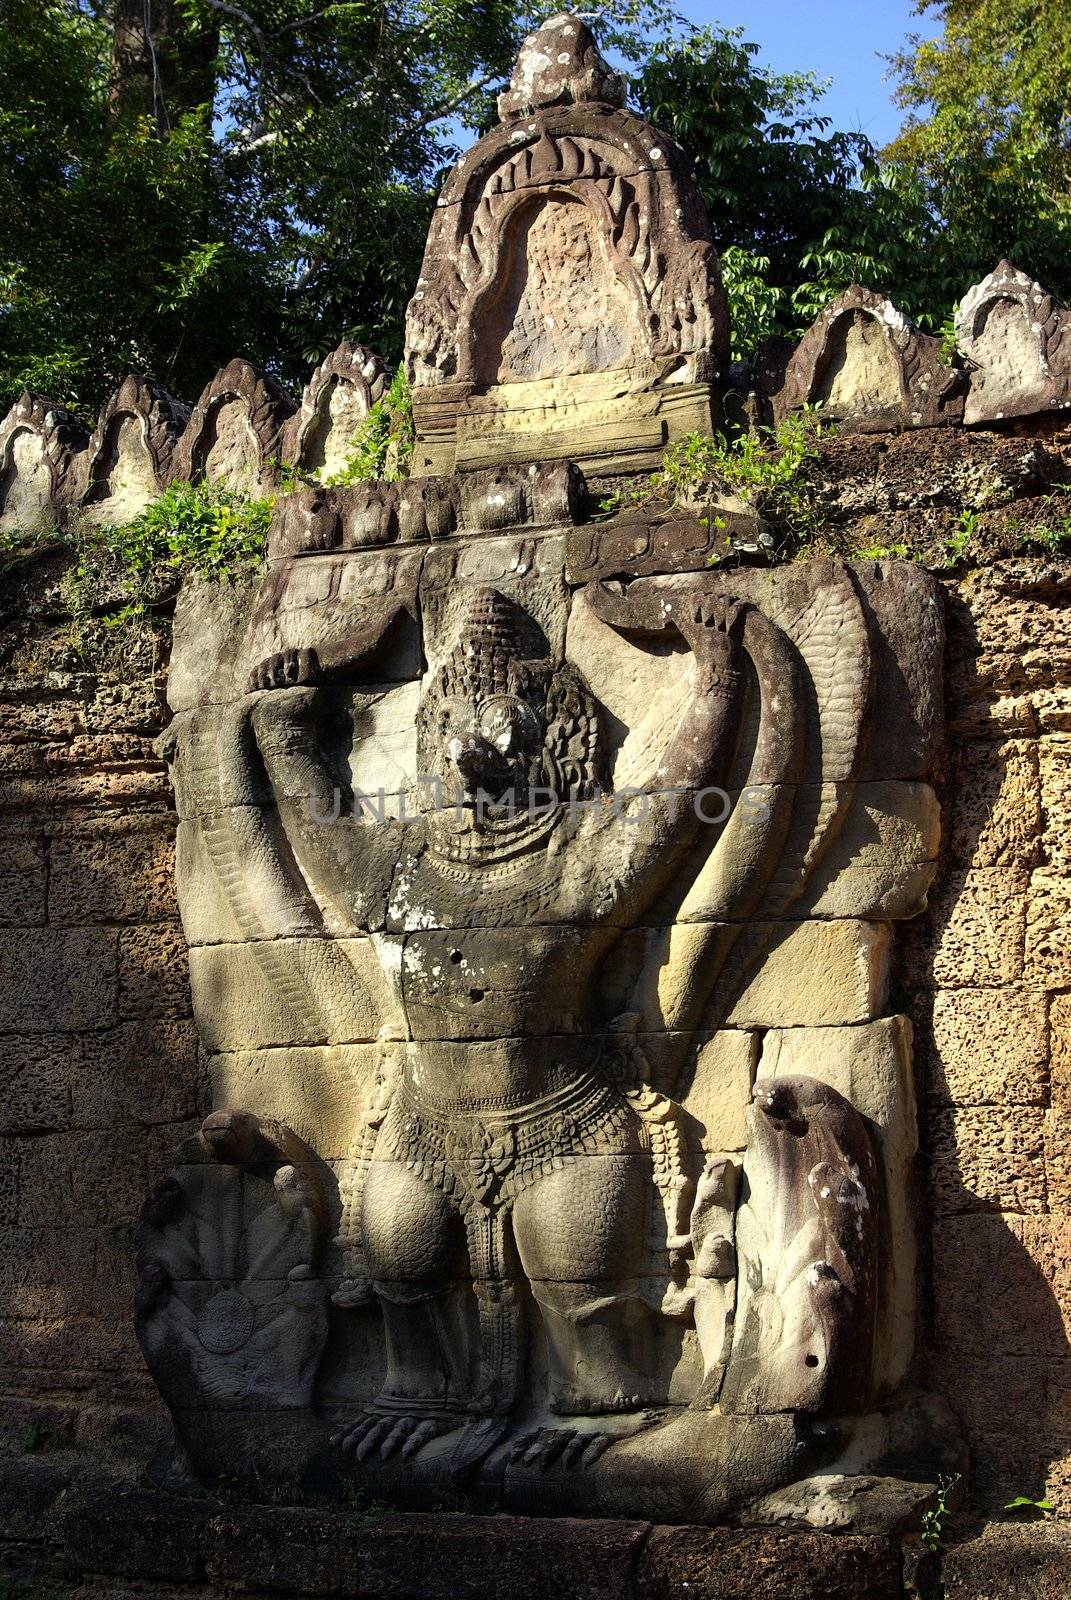 It's a view of one of Cambodian god engraved on a temple wall in Angkor